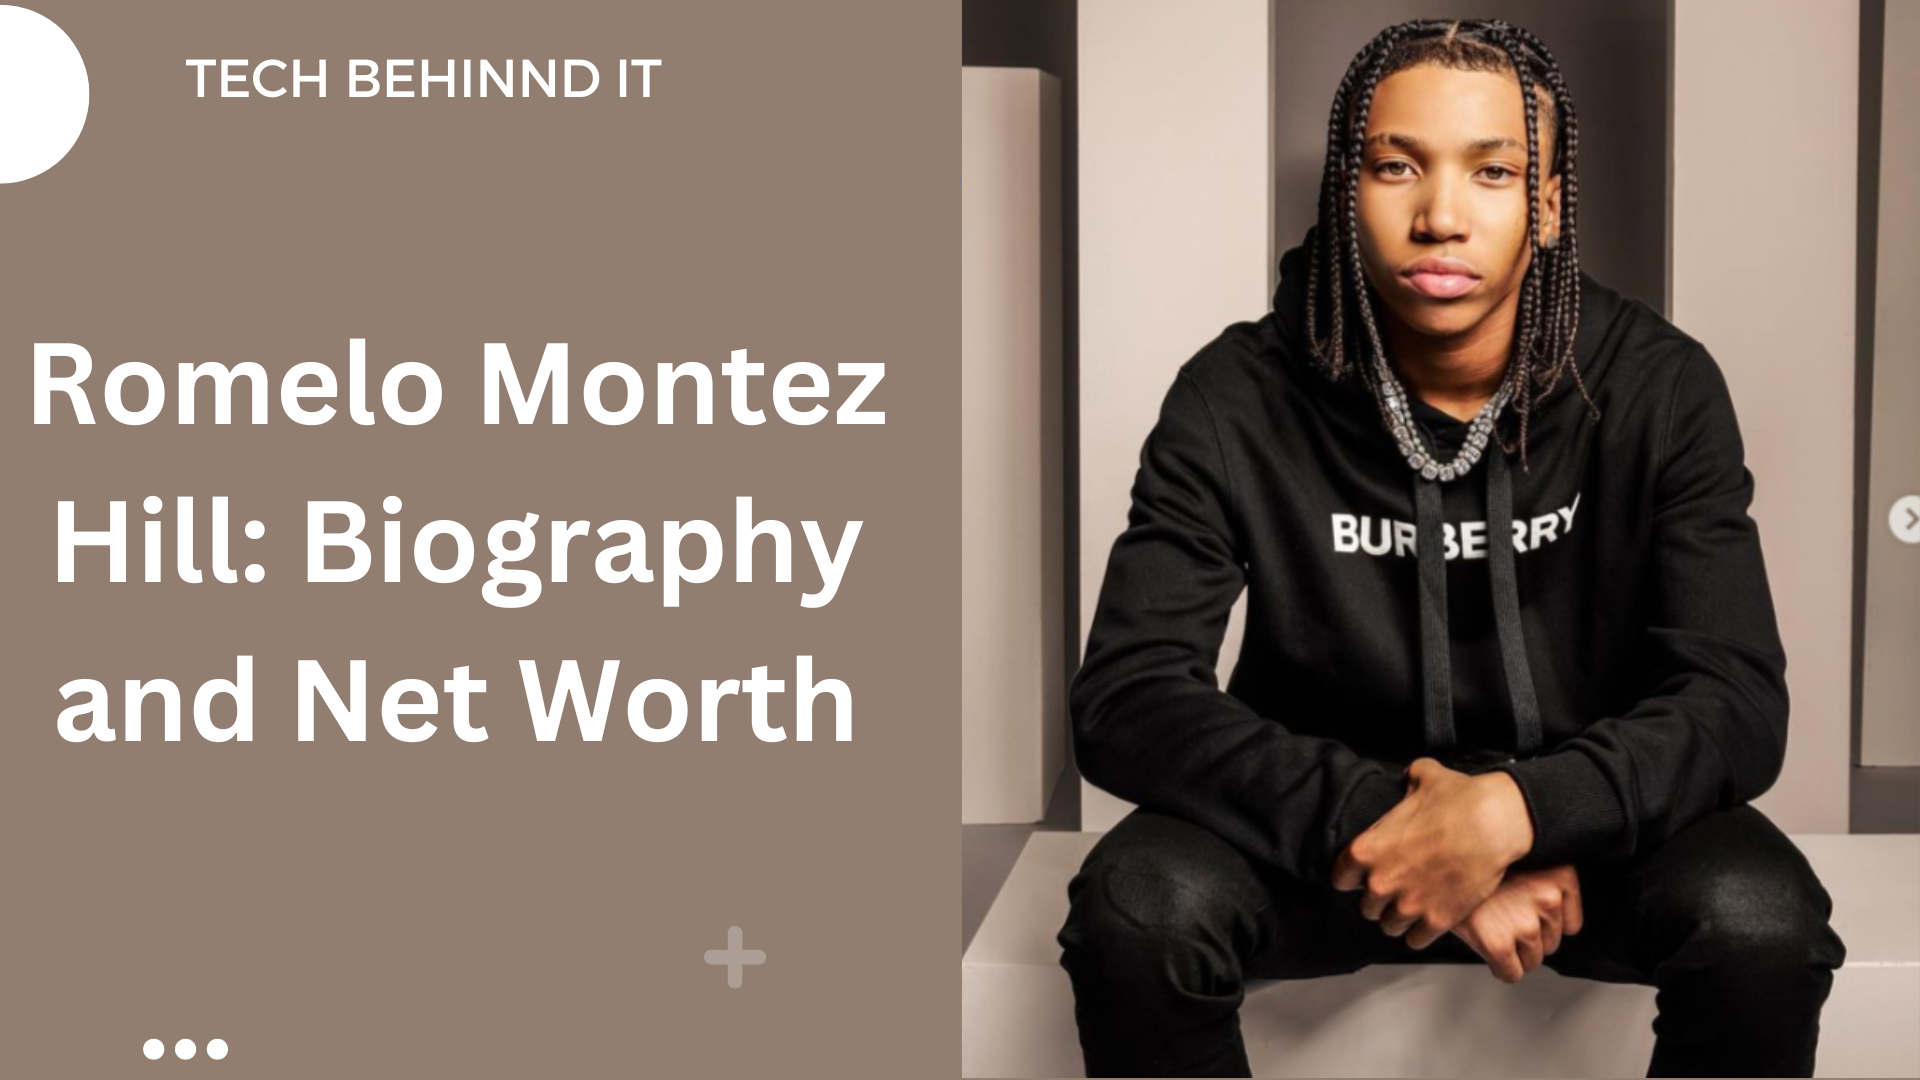 Romelo Montez Hill: Biography and Net Worth